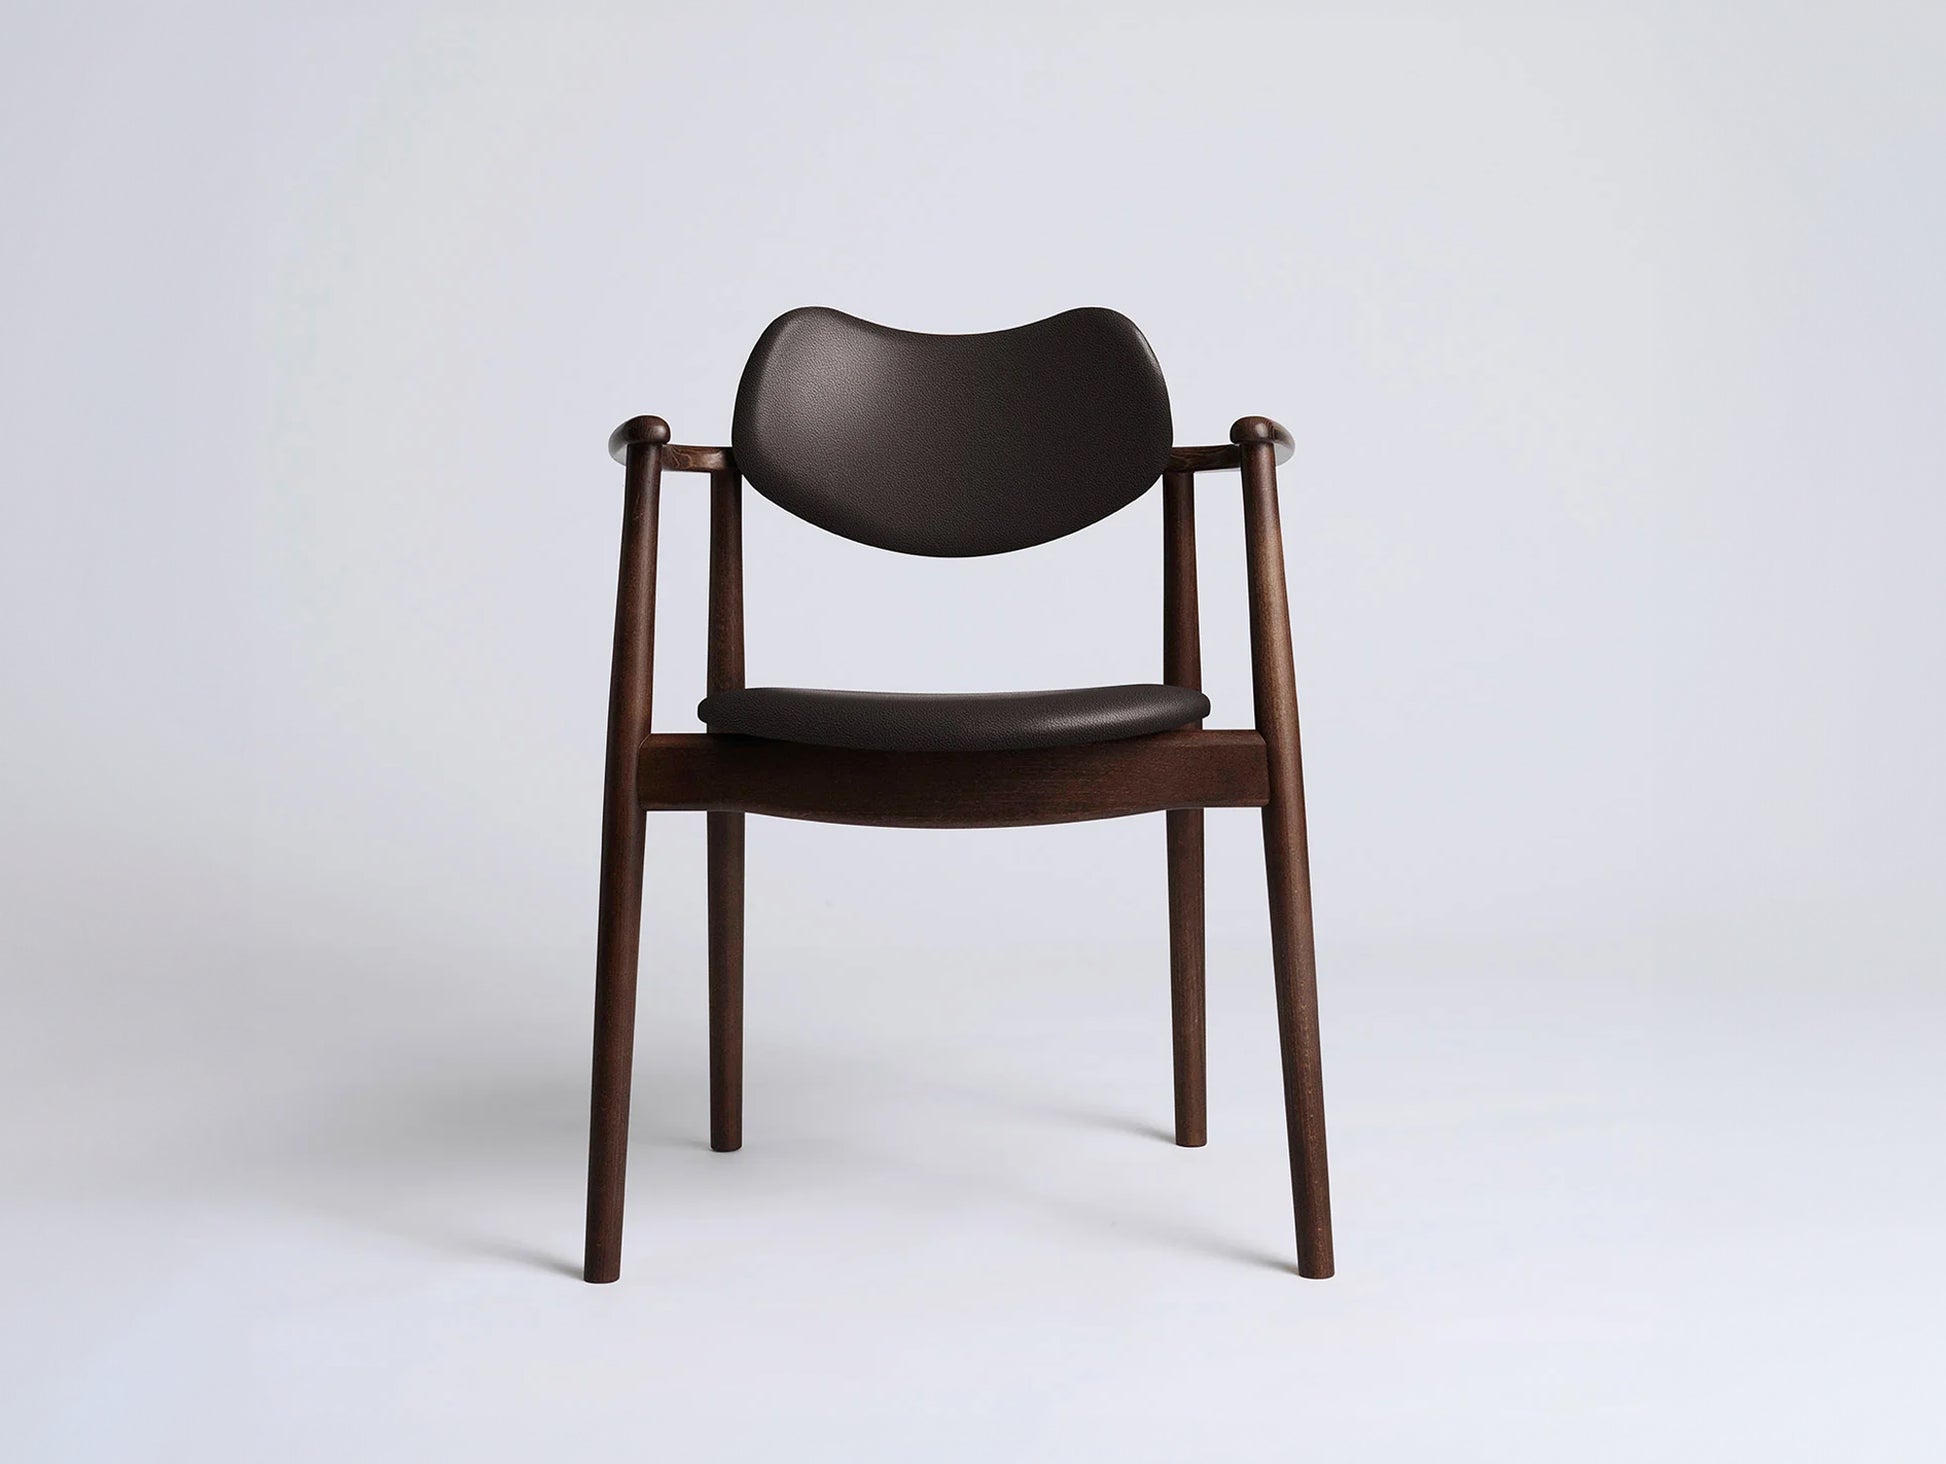 Regatta Chair Seat and Back Upholstered by Ro Collection - Walnut Stained Beech / Standard Sierra Dark Brown Leather